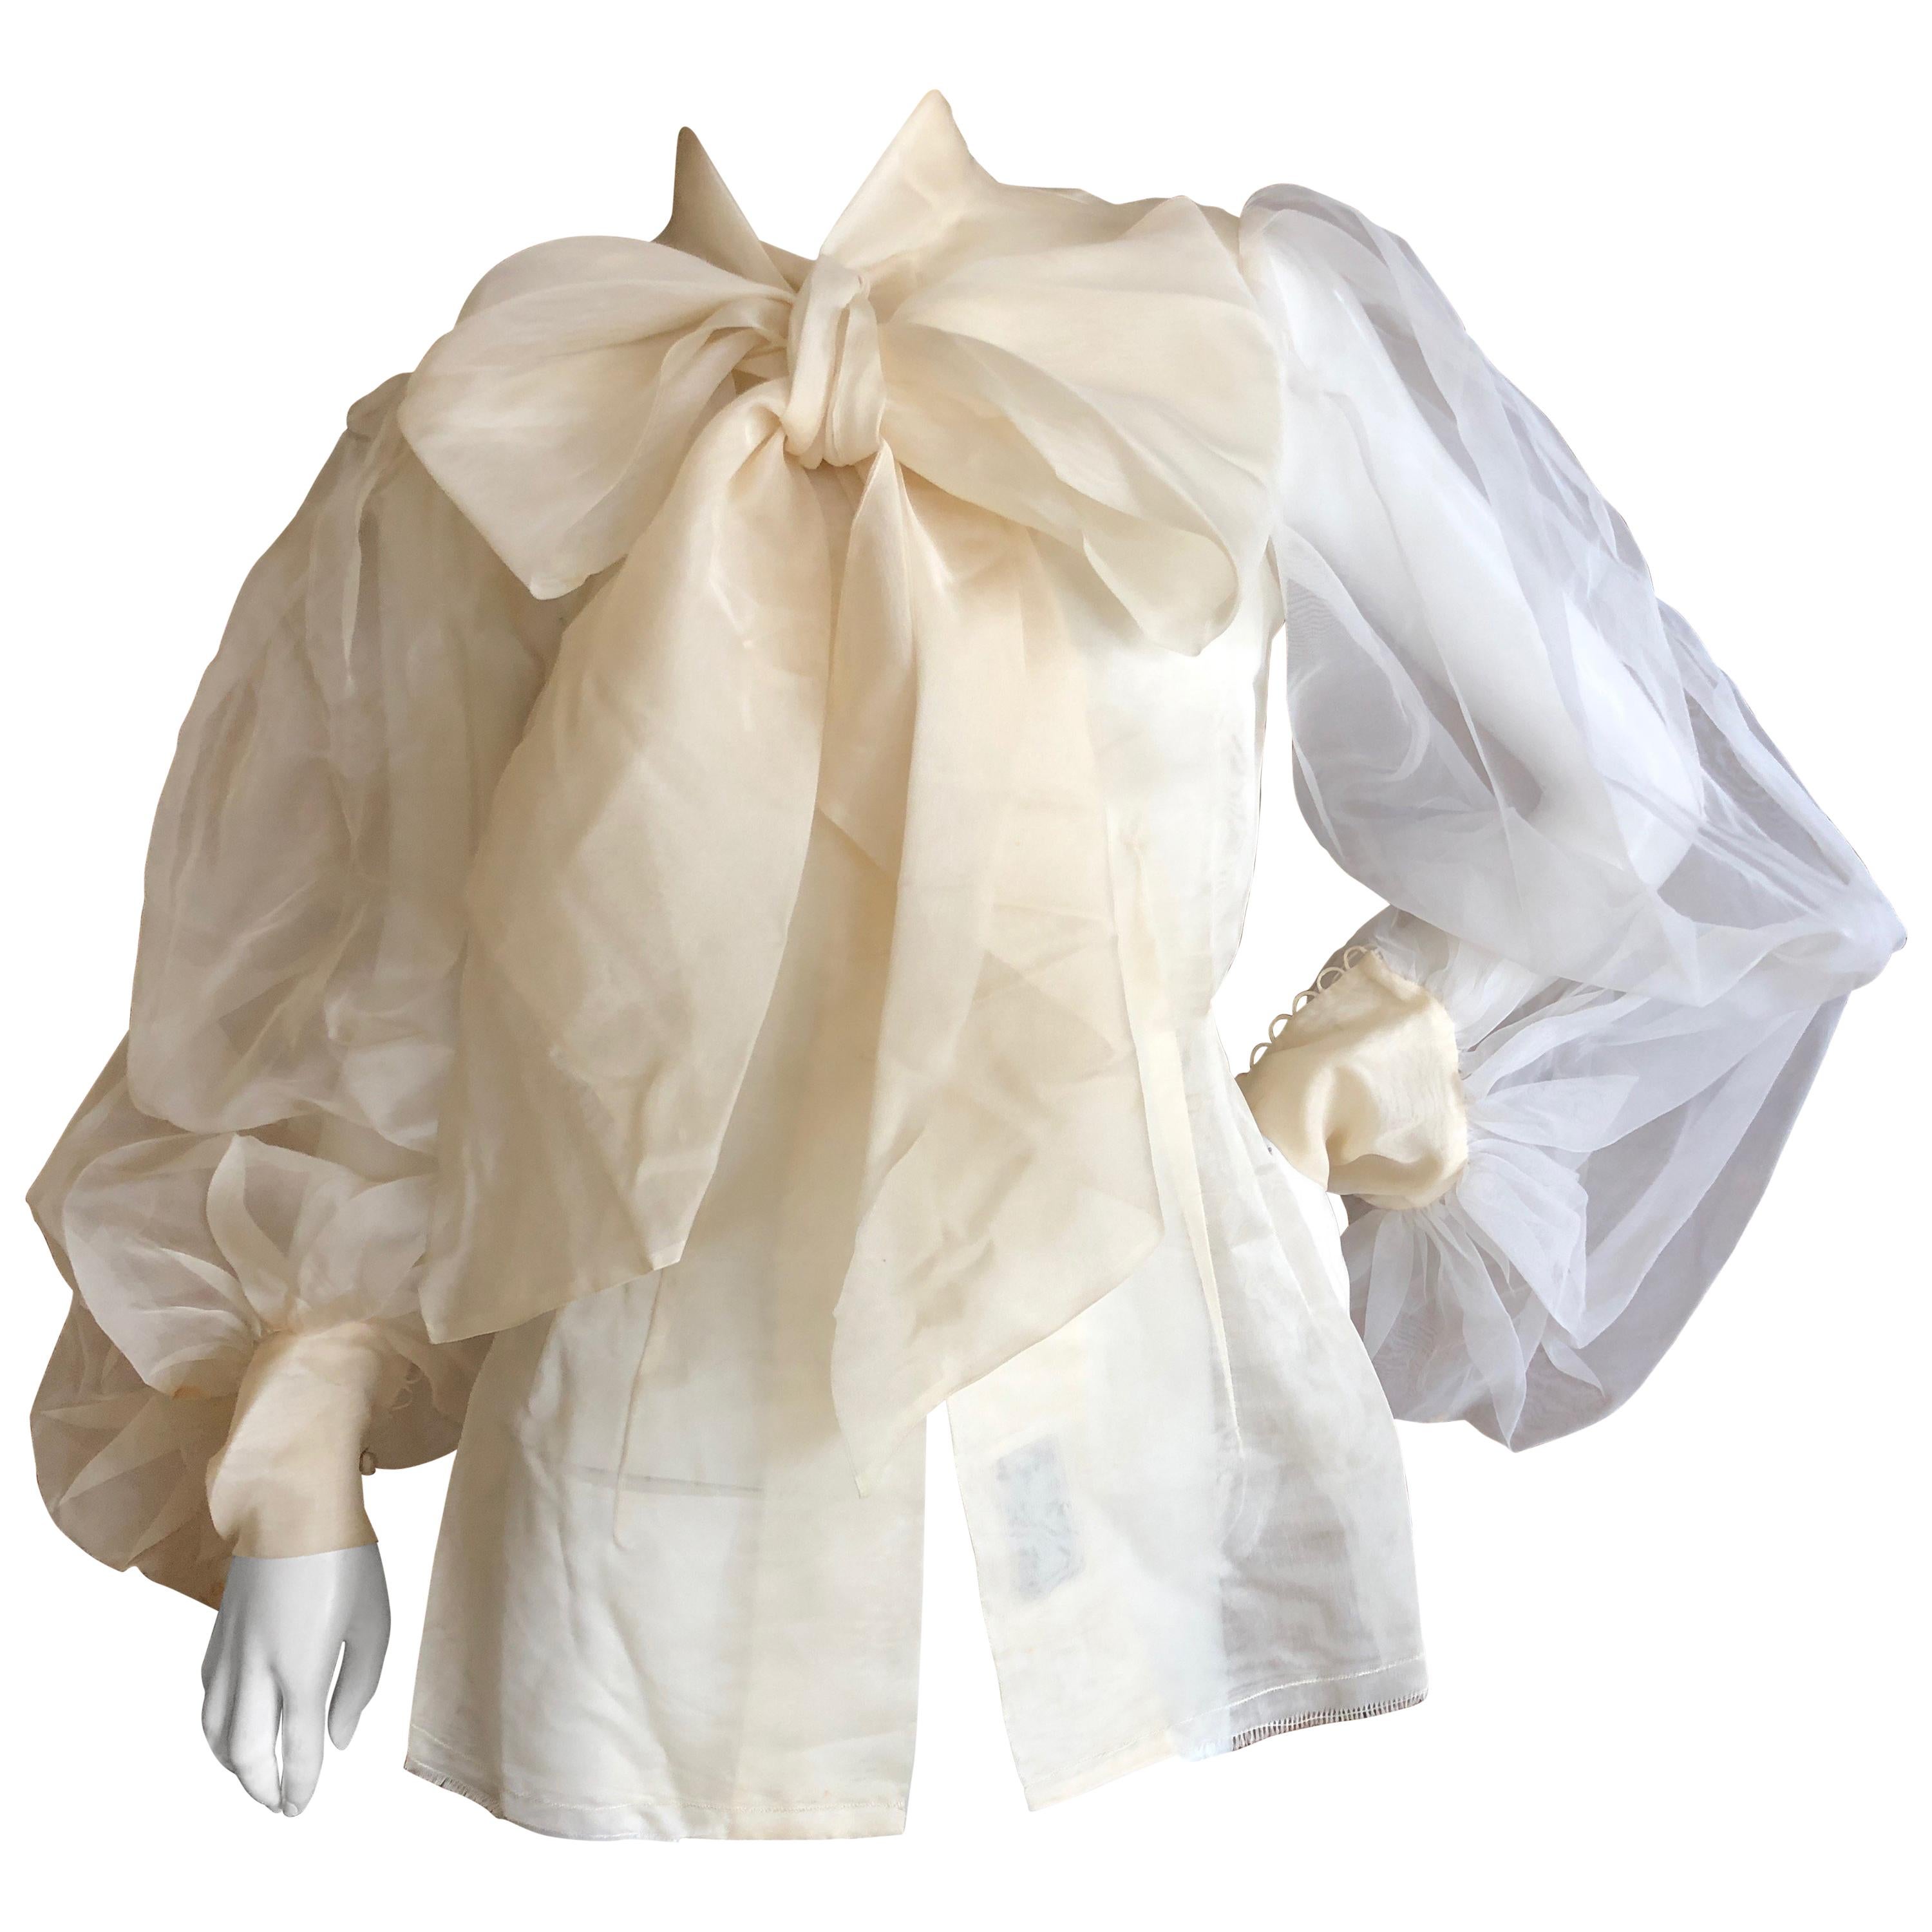 Cardinali Sheer Ivory Silk Blouse with Dramatic Sleeves and Bow  Fall 1971 